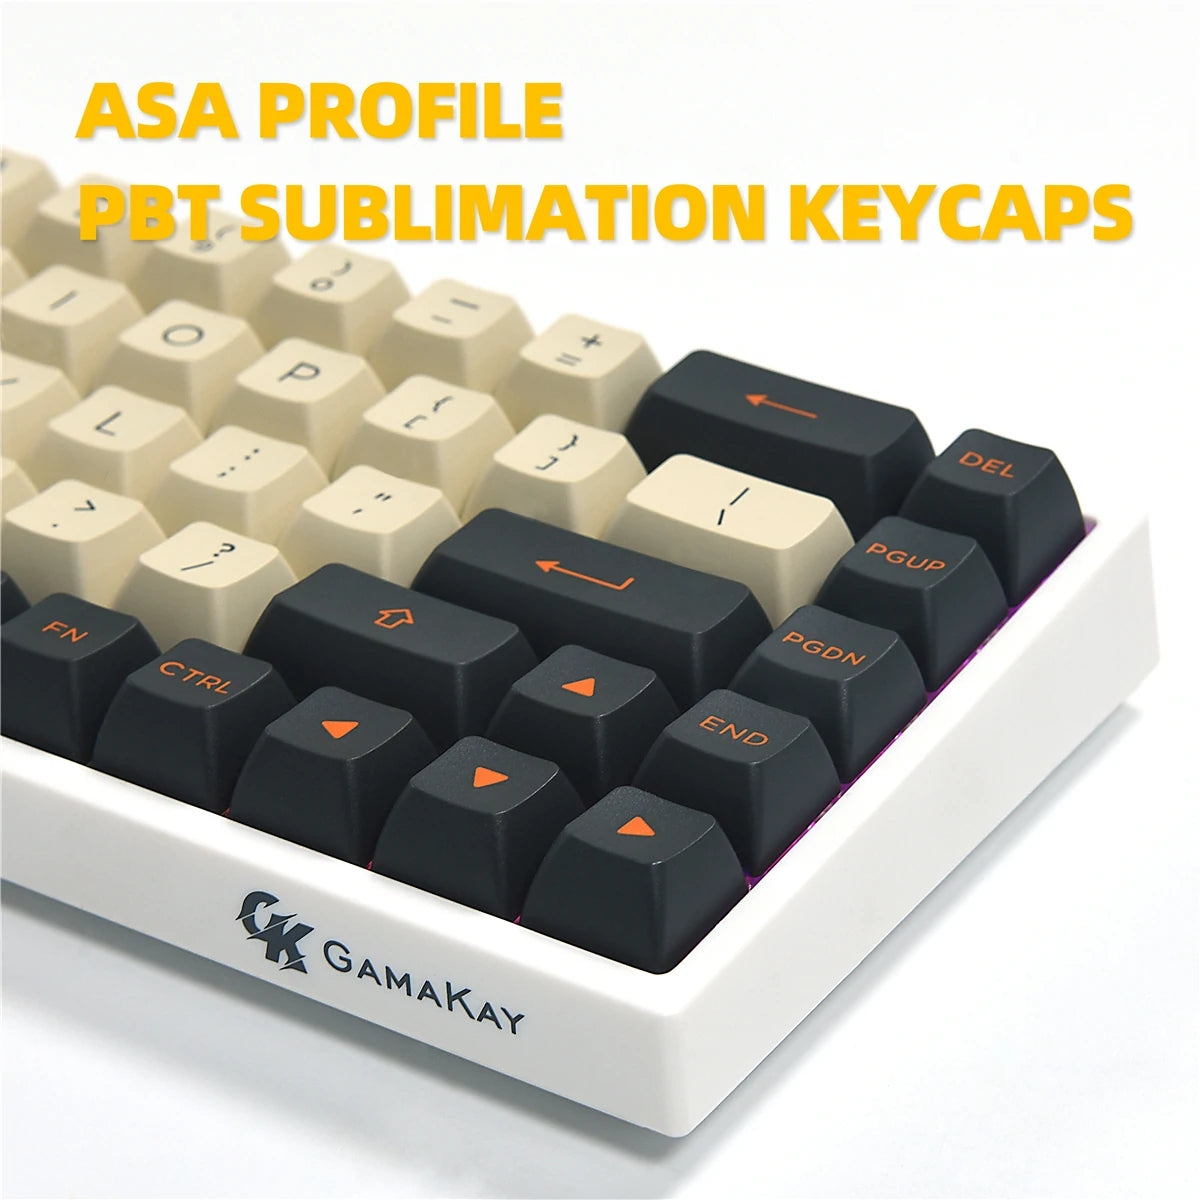 The TK68 65 keyboard features XDA/ASA profile PBT keycaps, providing a durable and comfortable typing experience.